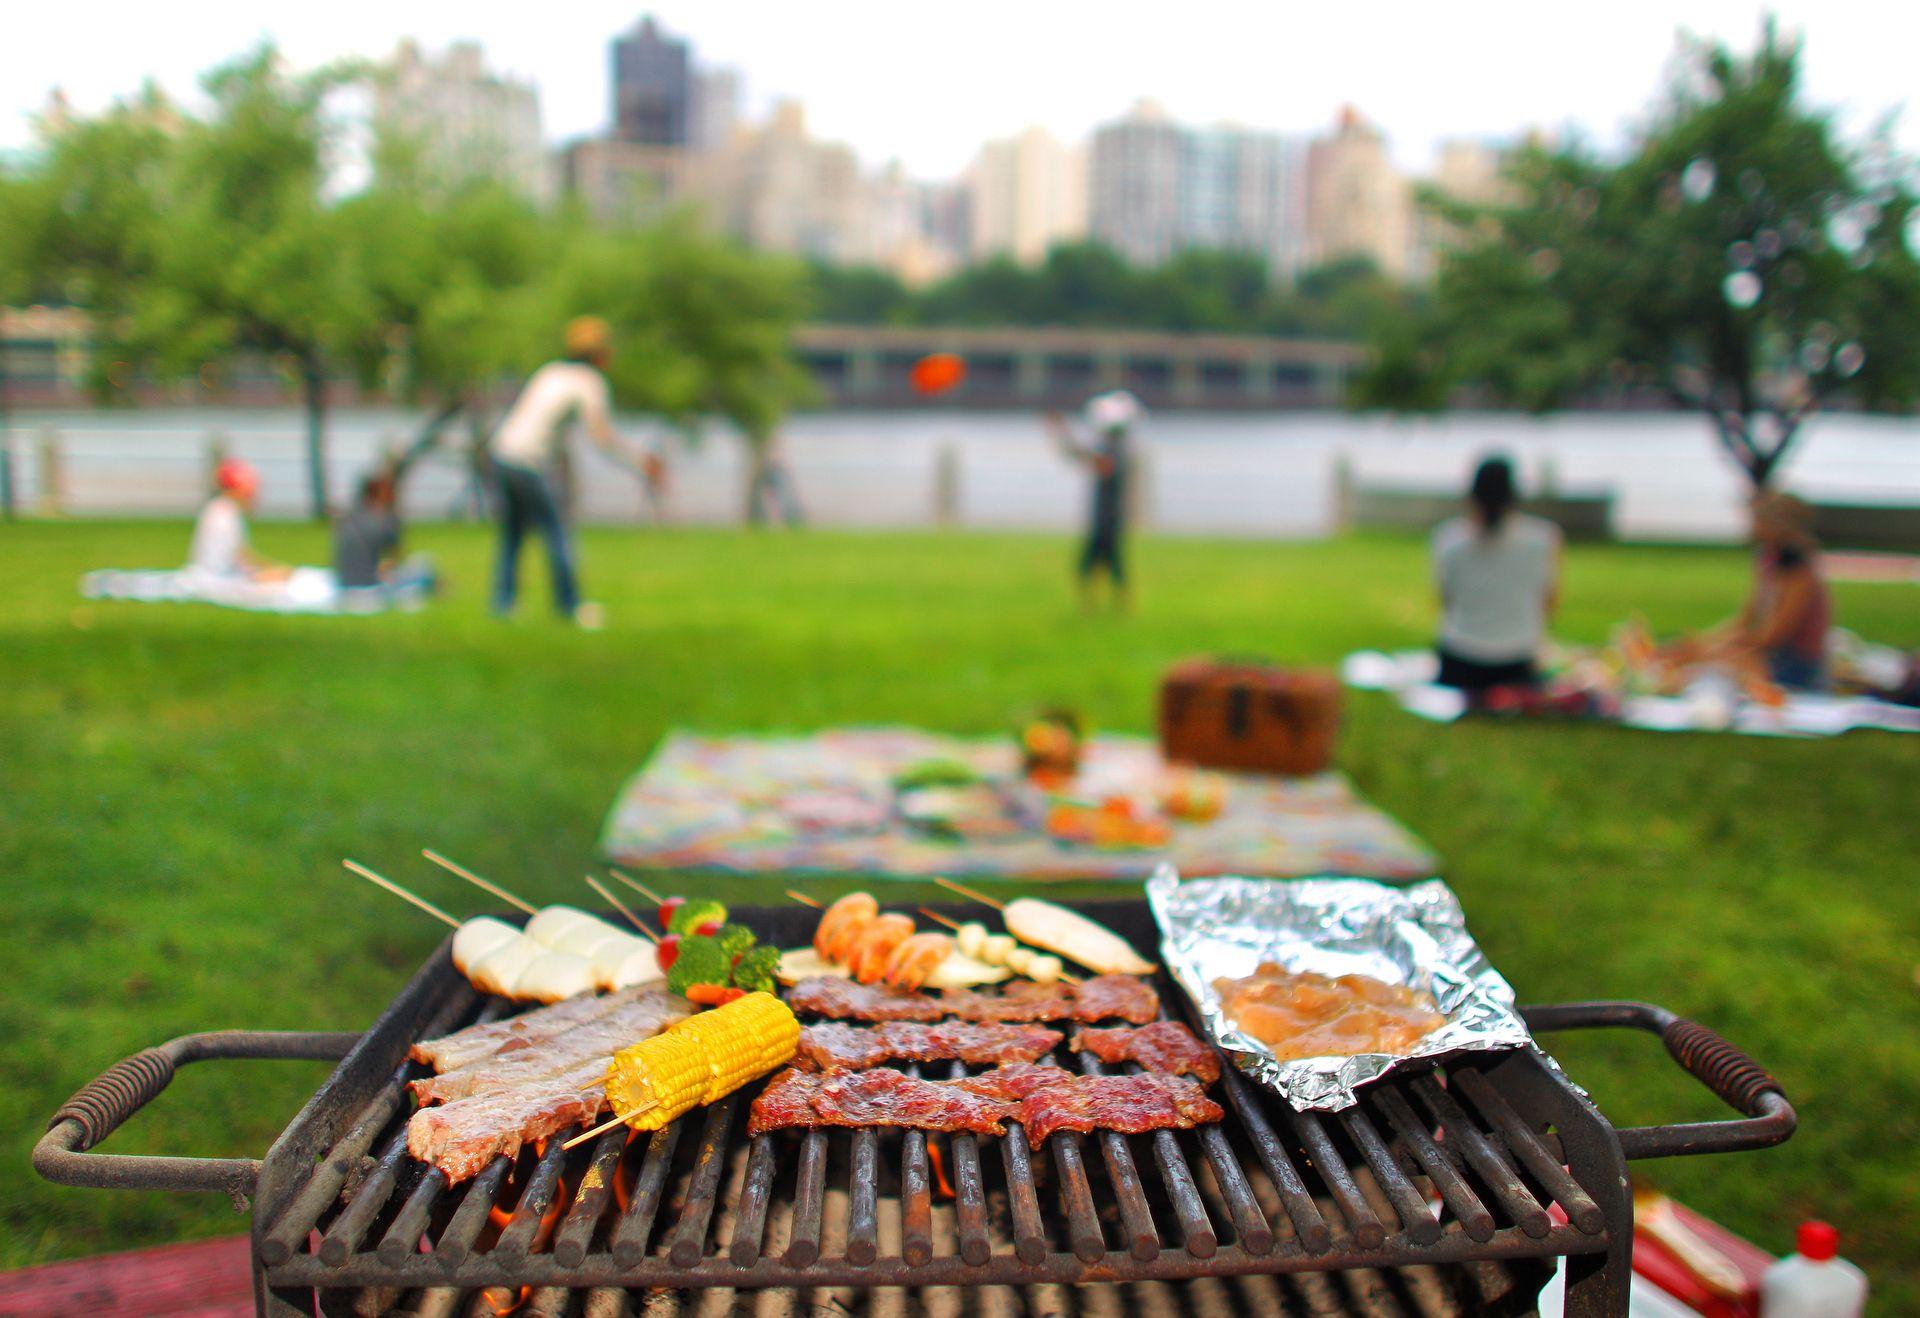 Barbecue Wallpaper High Quality